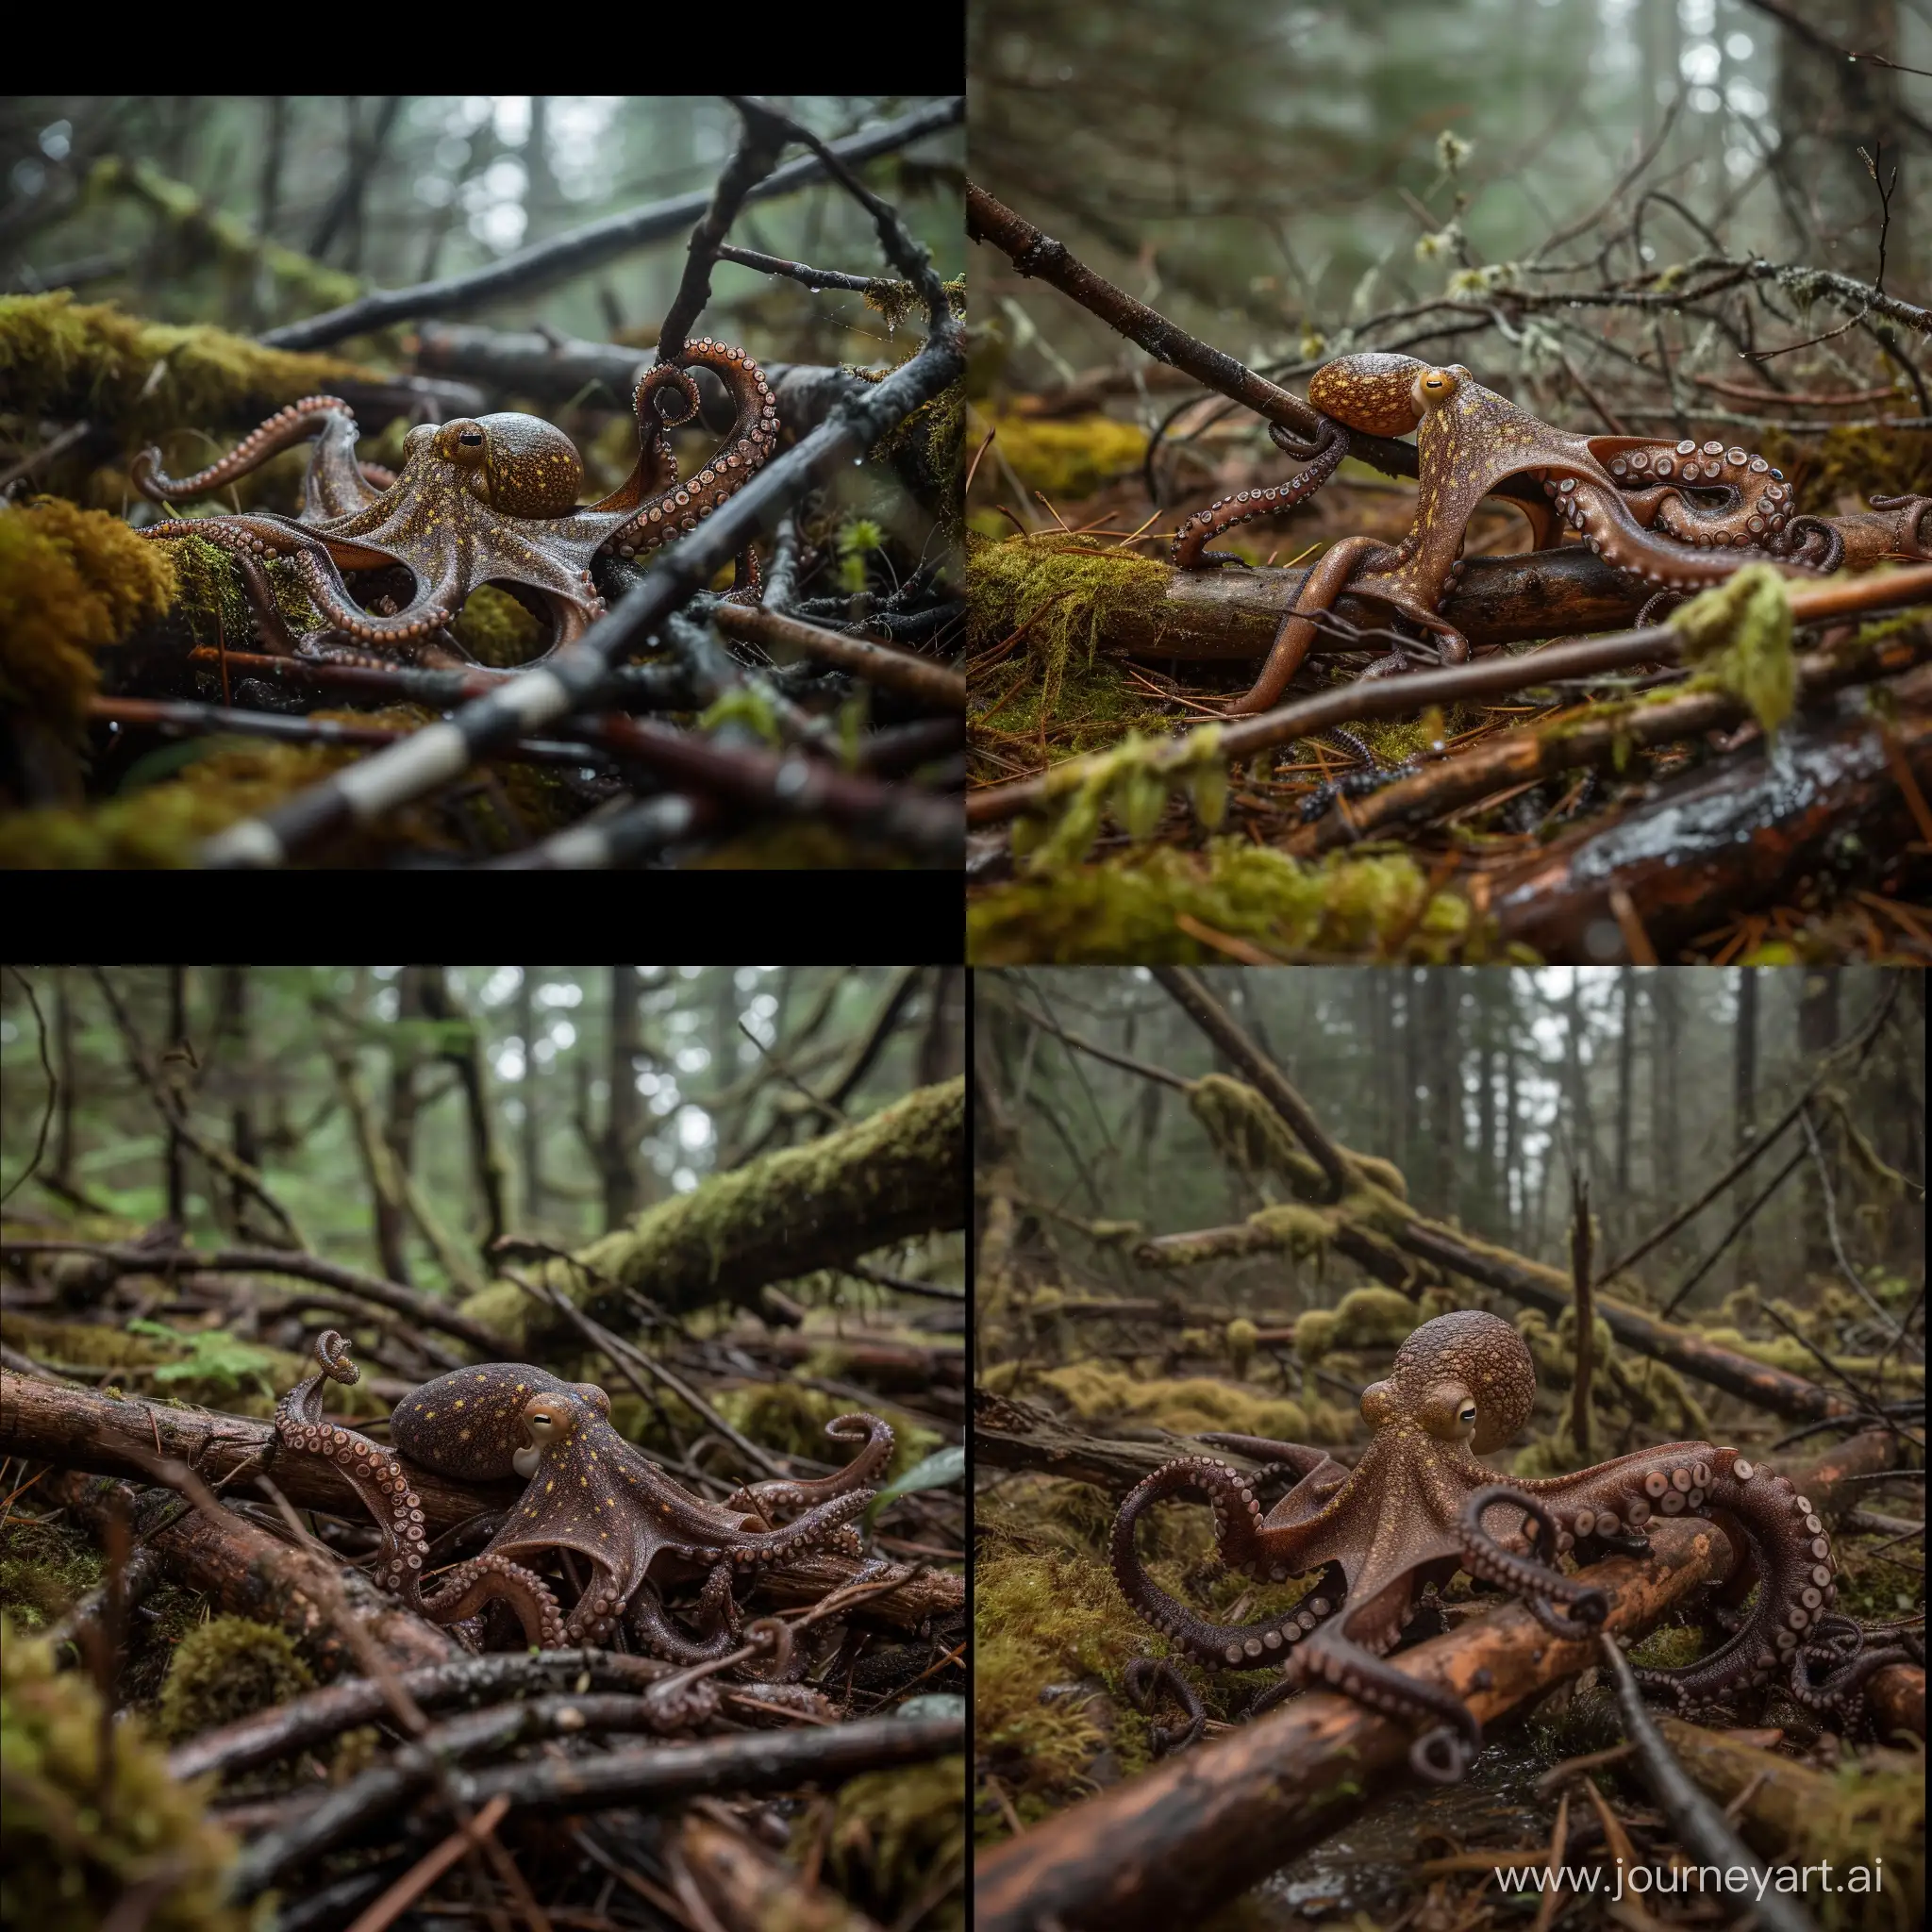 Majestic-Octopus-in-Mossy-Pine-Rainforest-Wildlife-Photography